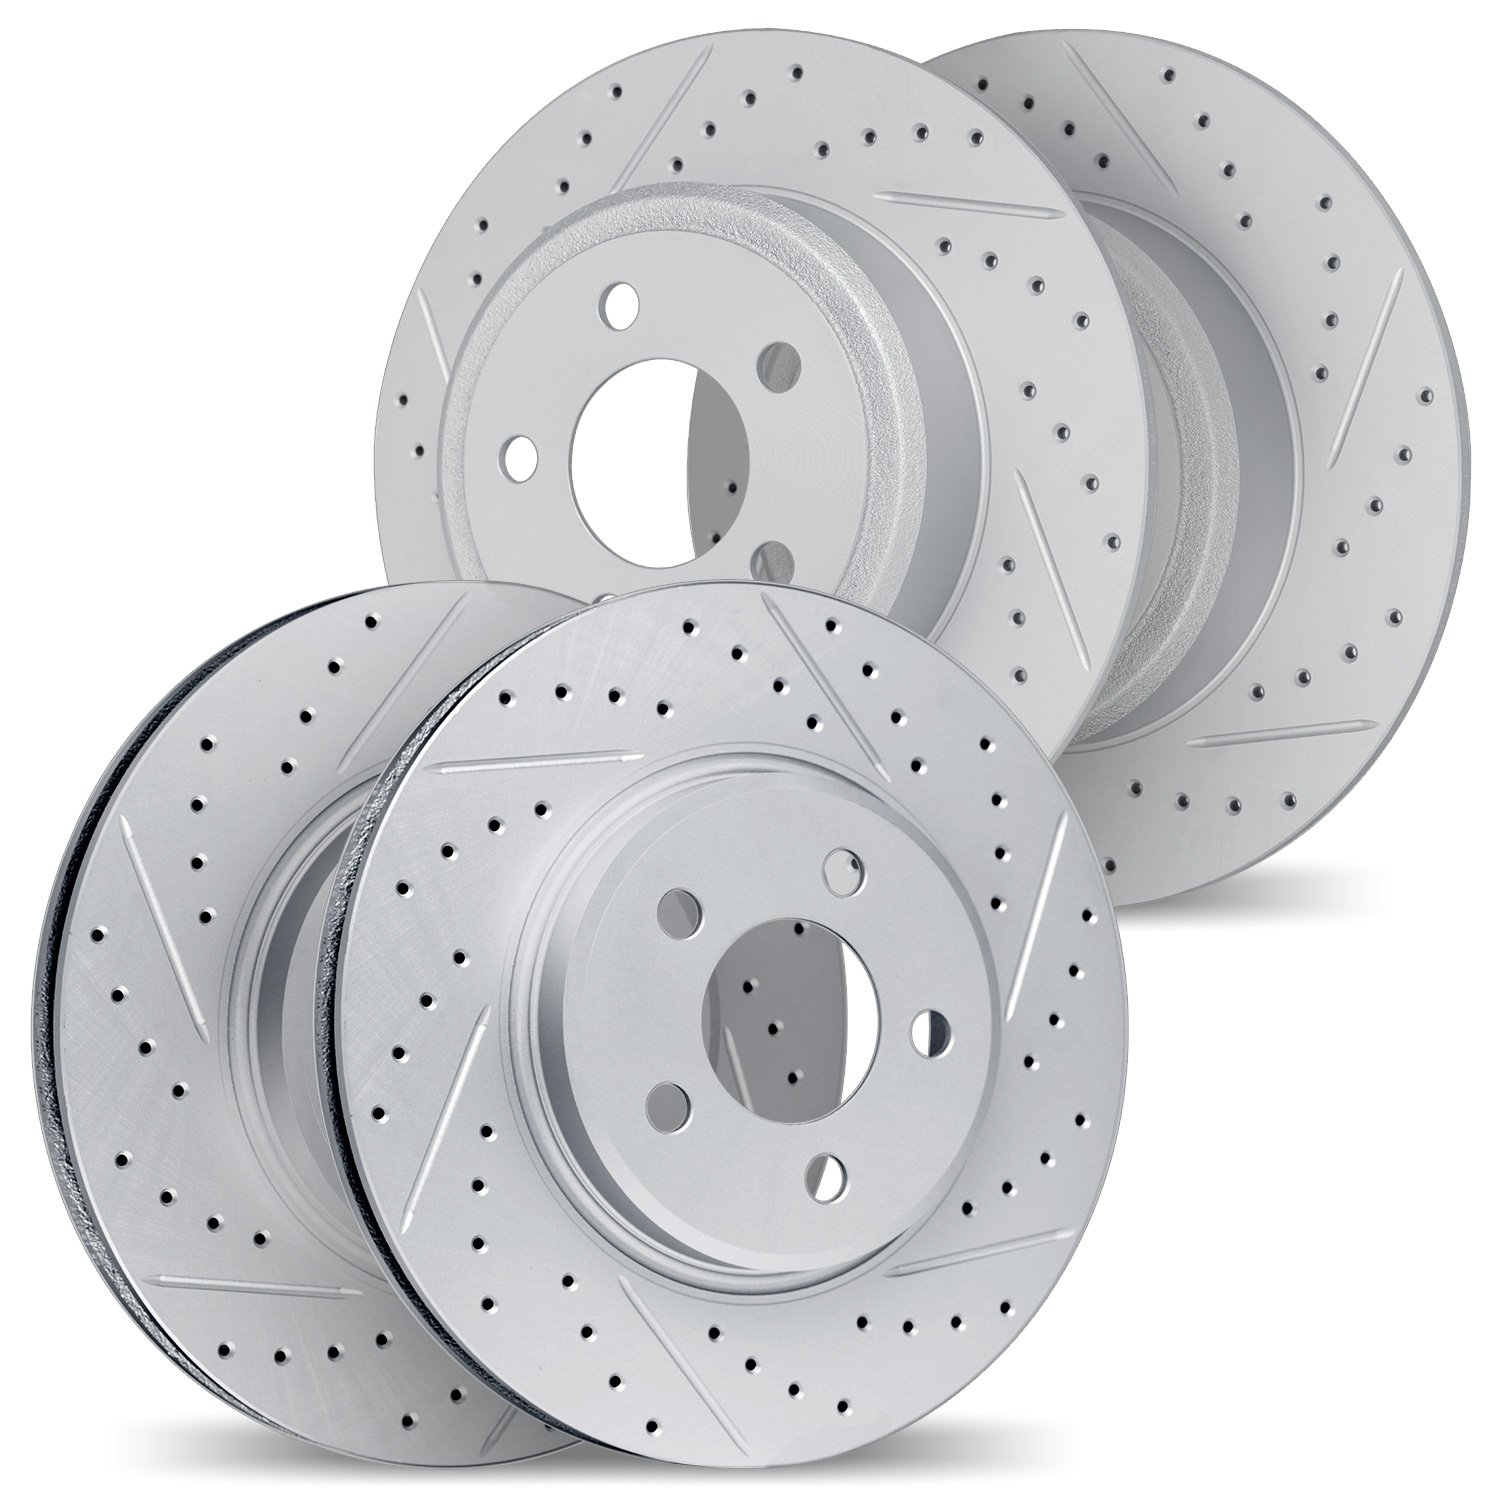 2004-63025 Geoperformance Drilled/Slotted Brake Rotors, 2020-2021 Mercedes-Benz, Position: Front and Rear